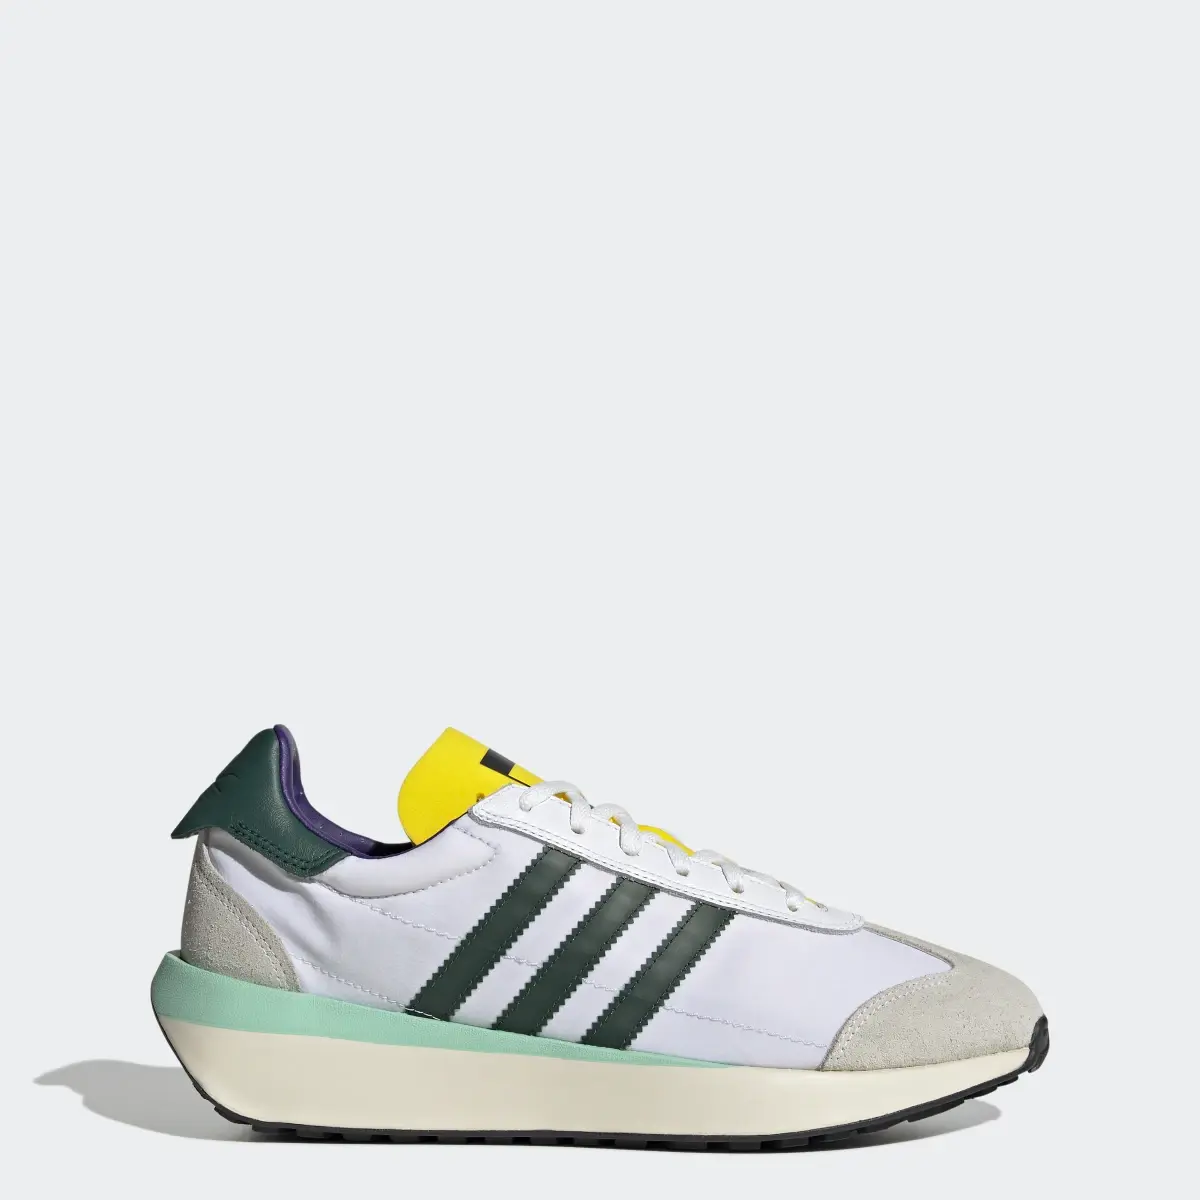 Adidas Sapatilhas Country XLG. 1